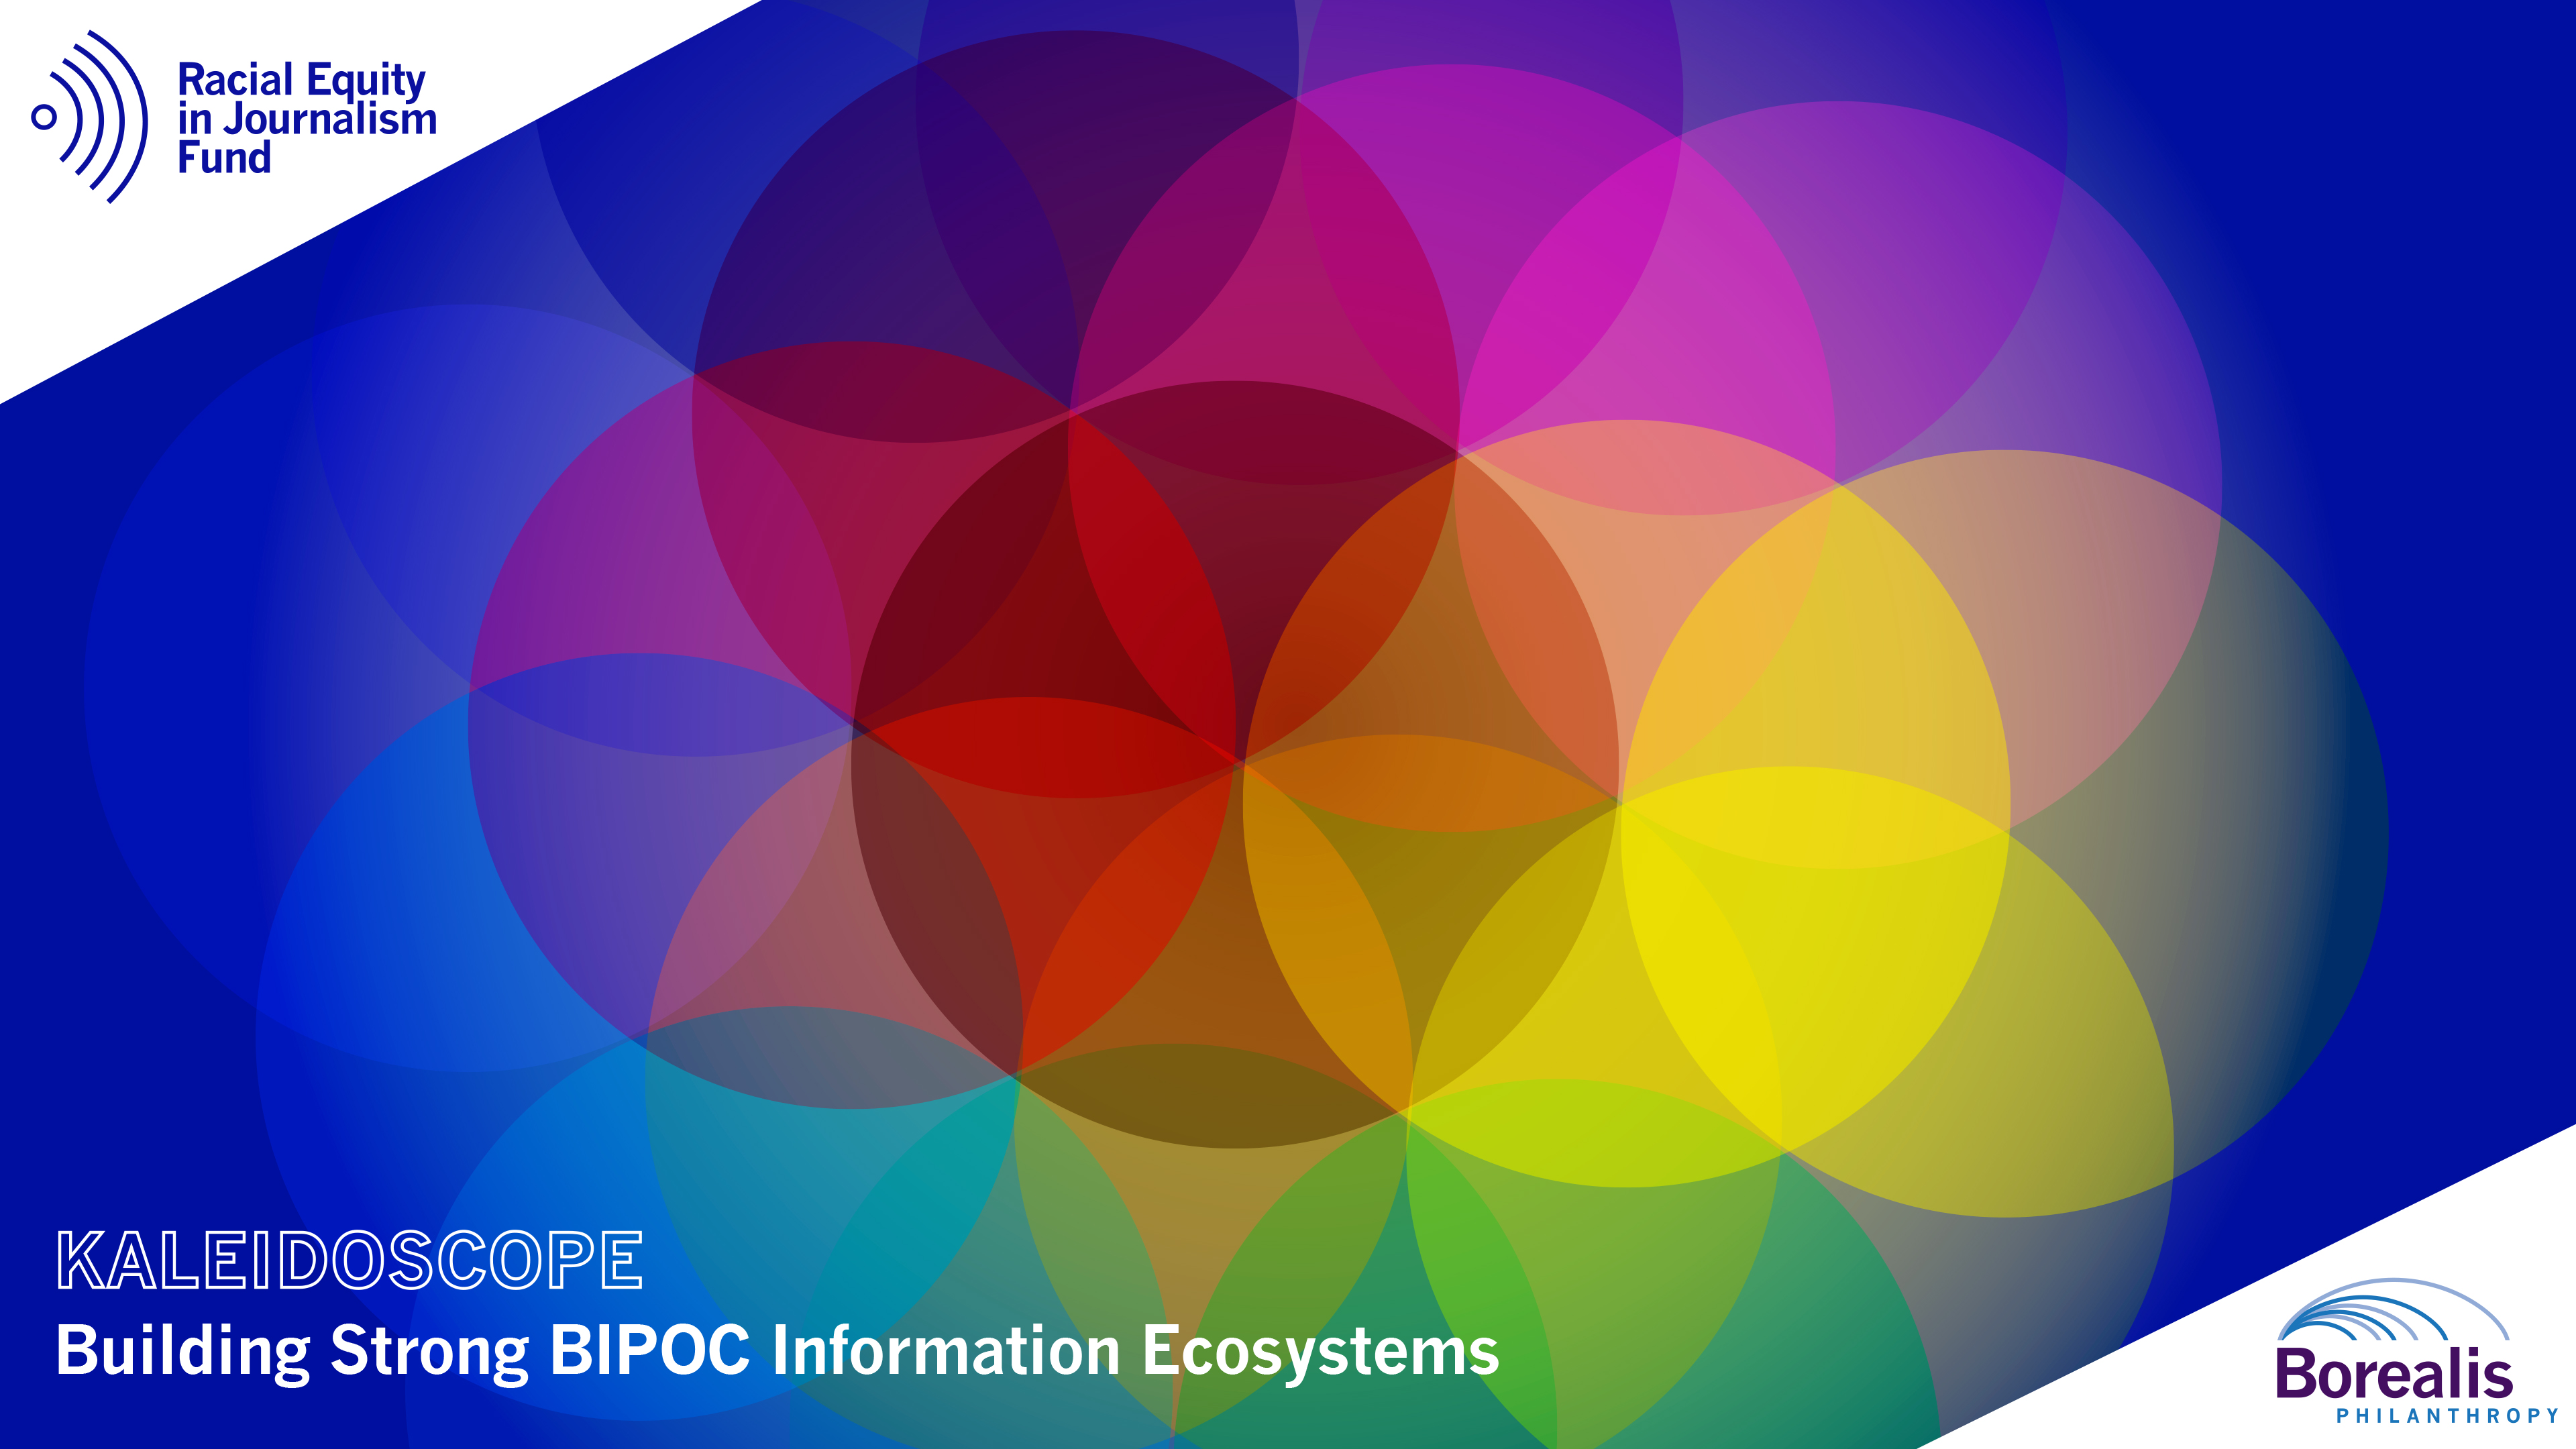 What We Learned: Empowering BIPOC Communities through Strong Information Ecosystems